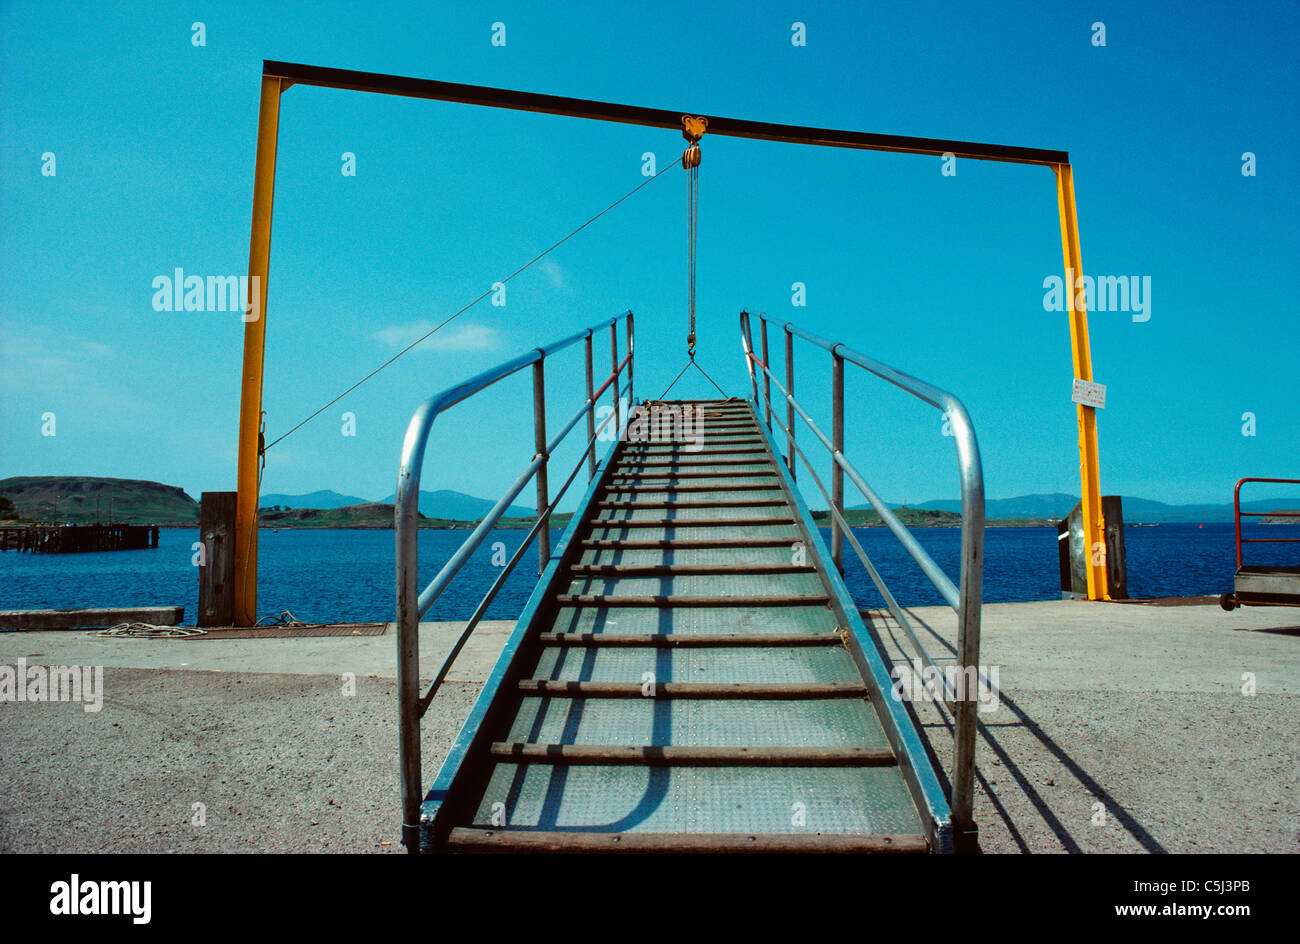 Unusual shot of stairway leading to nowhere, or thin air, Oban, Scotland Stock Photo